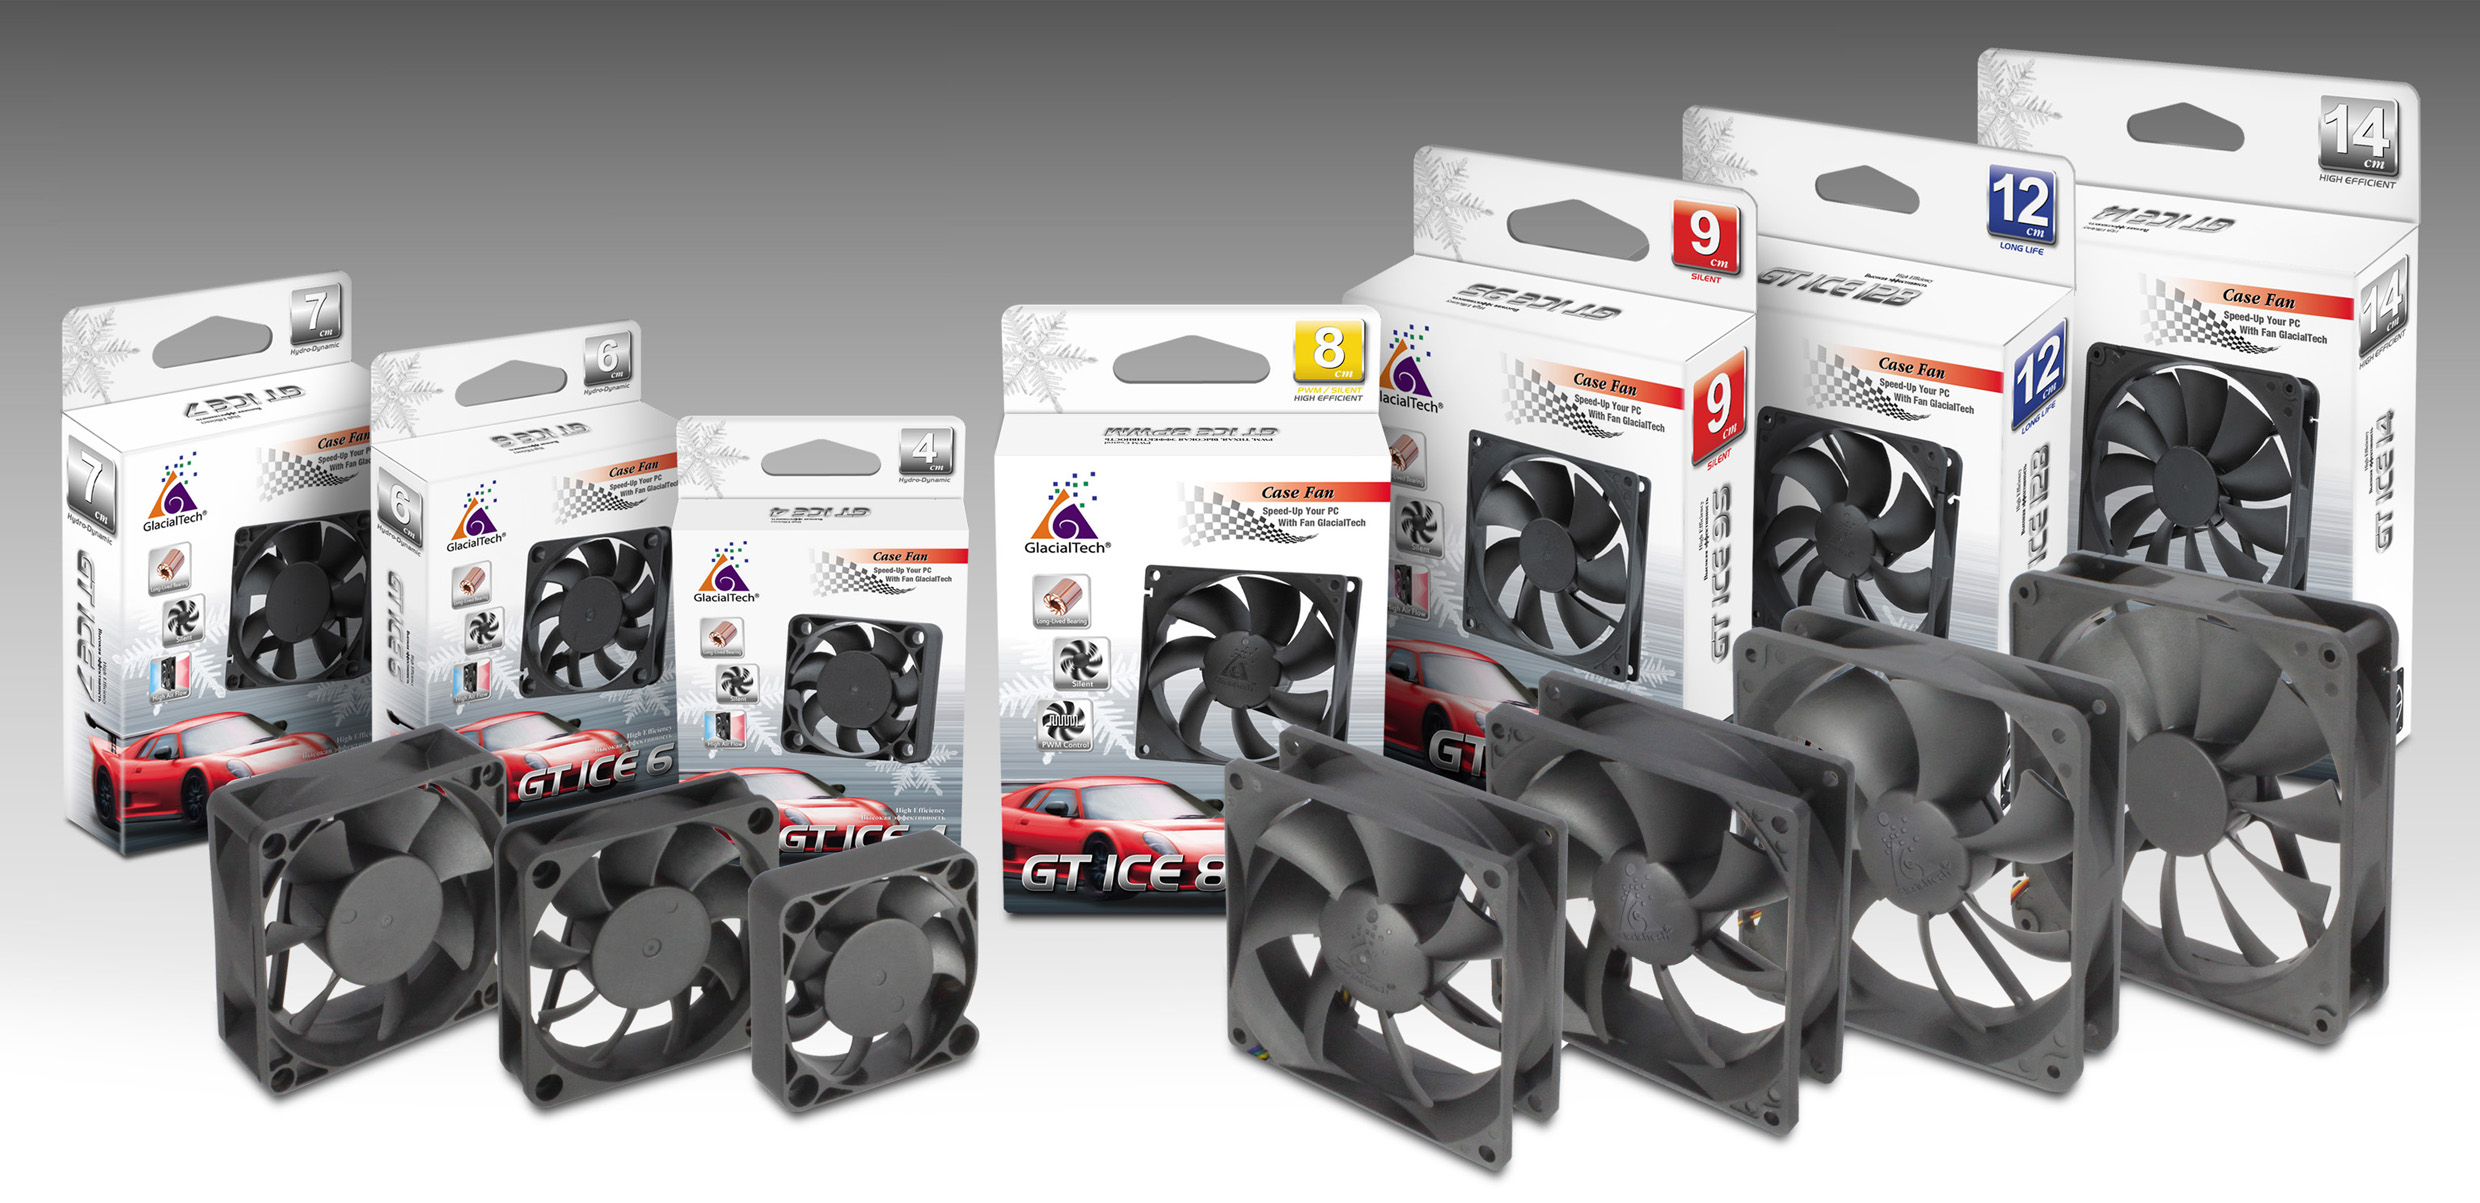 GlacialTech Reorganizes the PC Case Fan Product Line for PC Assemblers and DIY Market